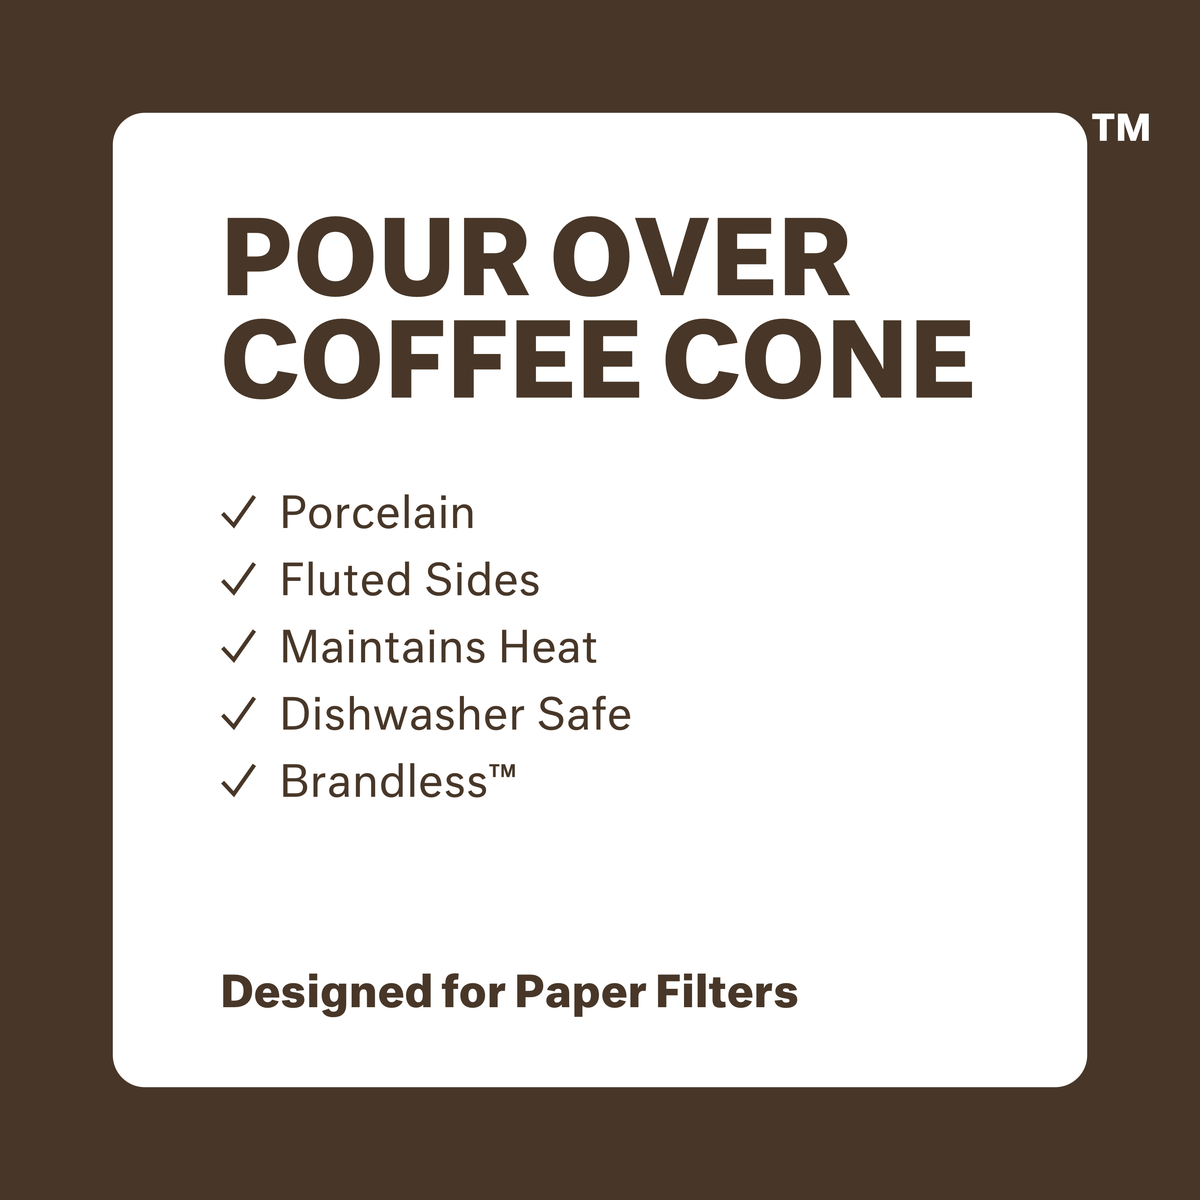 Pour over coffee cone: white porcelain, fluted sides, maintains heat, dishwasher safe, brandless. Designed for flat-truncated conical paper filters.